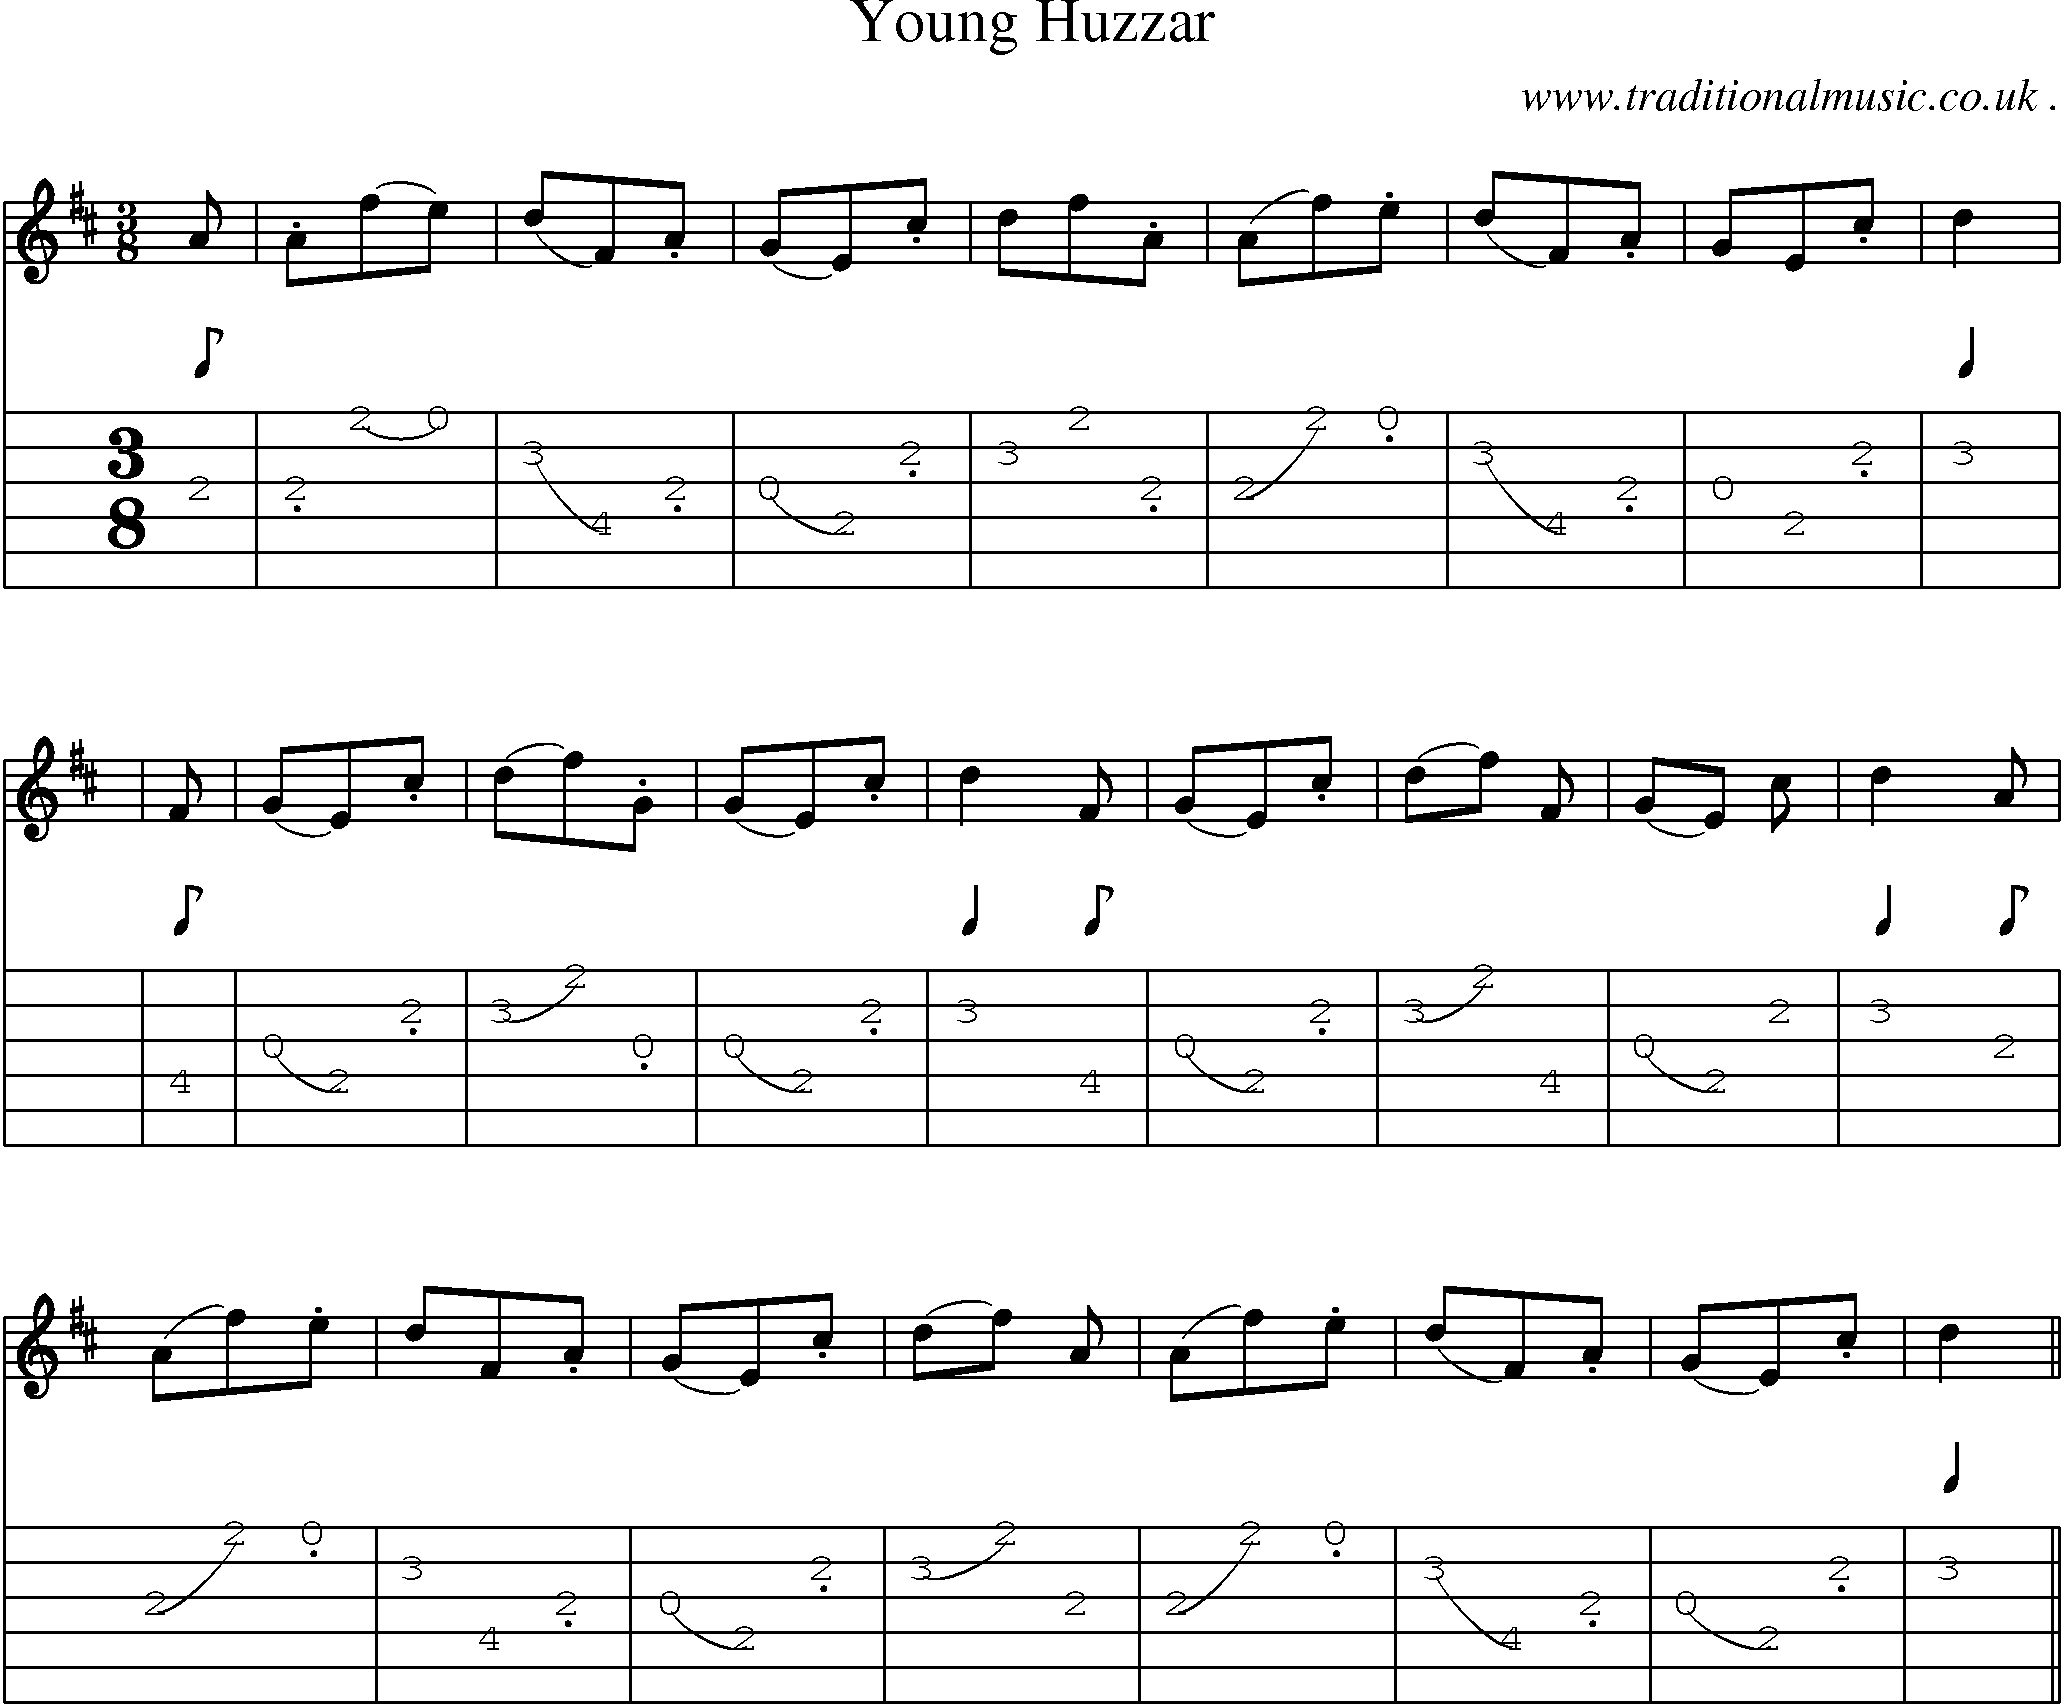 Sheet-Music and Guitar Tabs for Young Huzzar